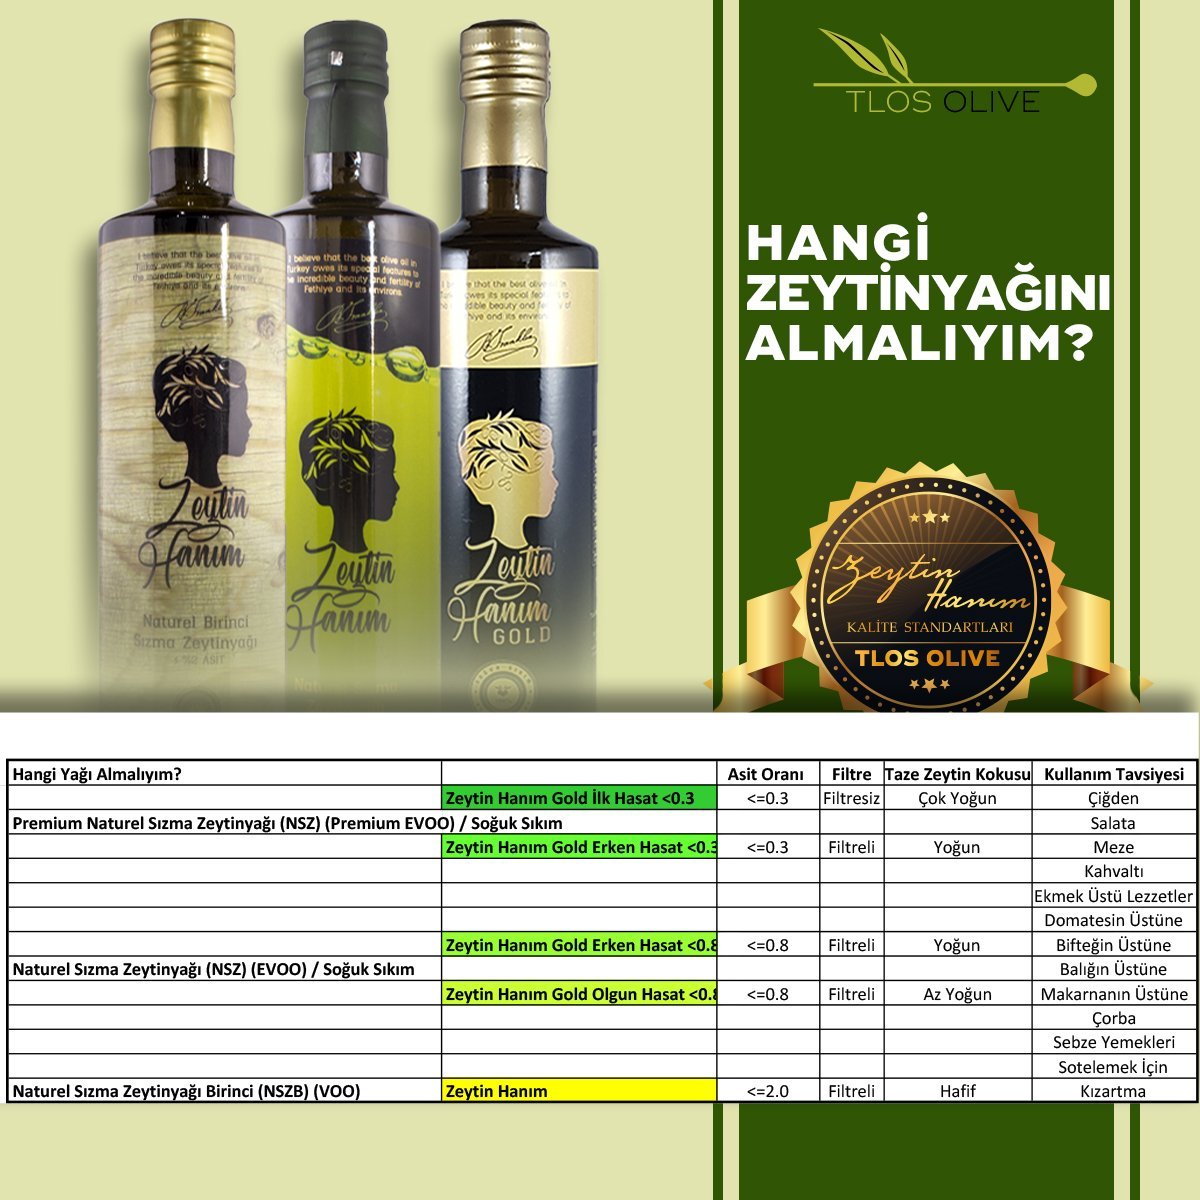 Which Olive Oil Should I Buy?